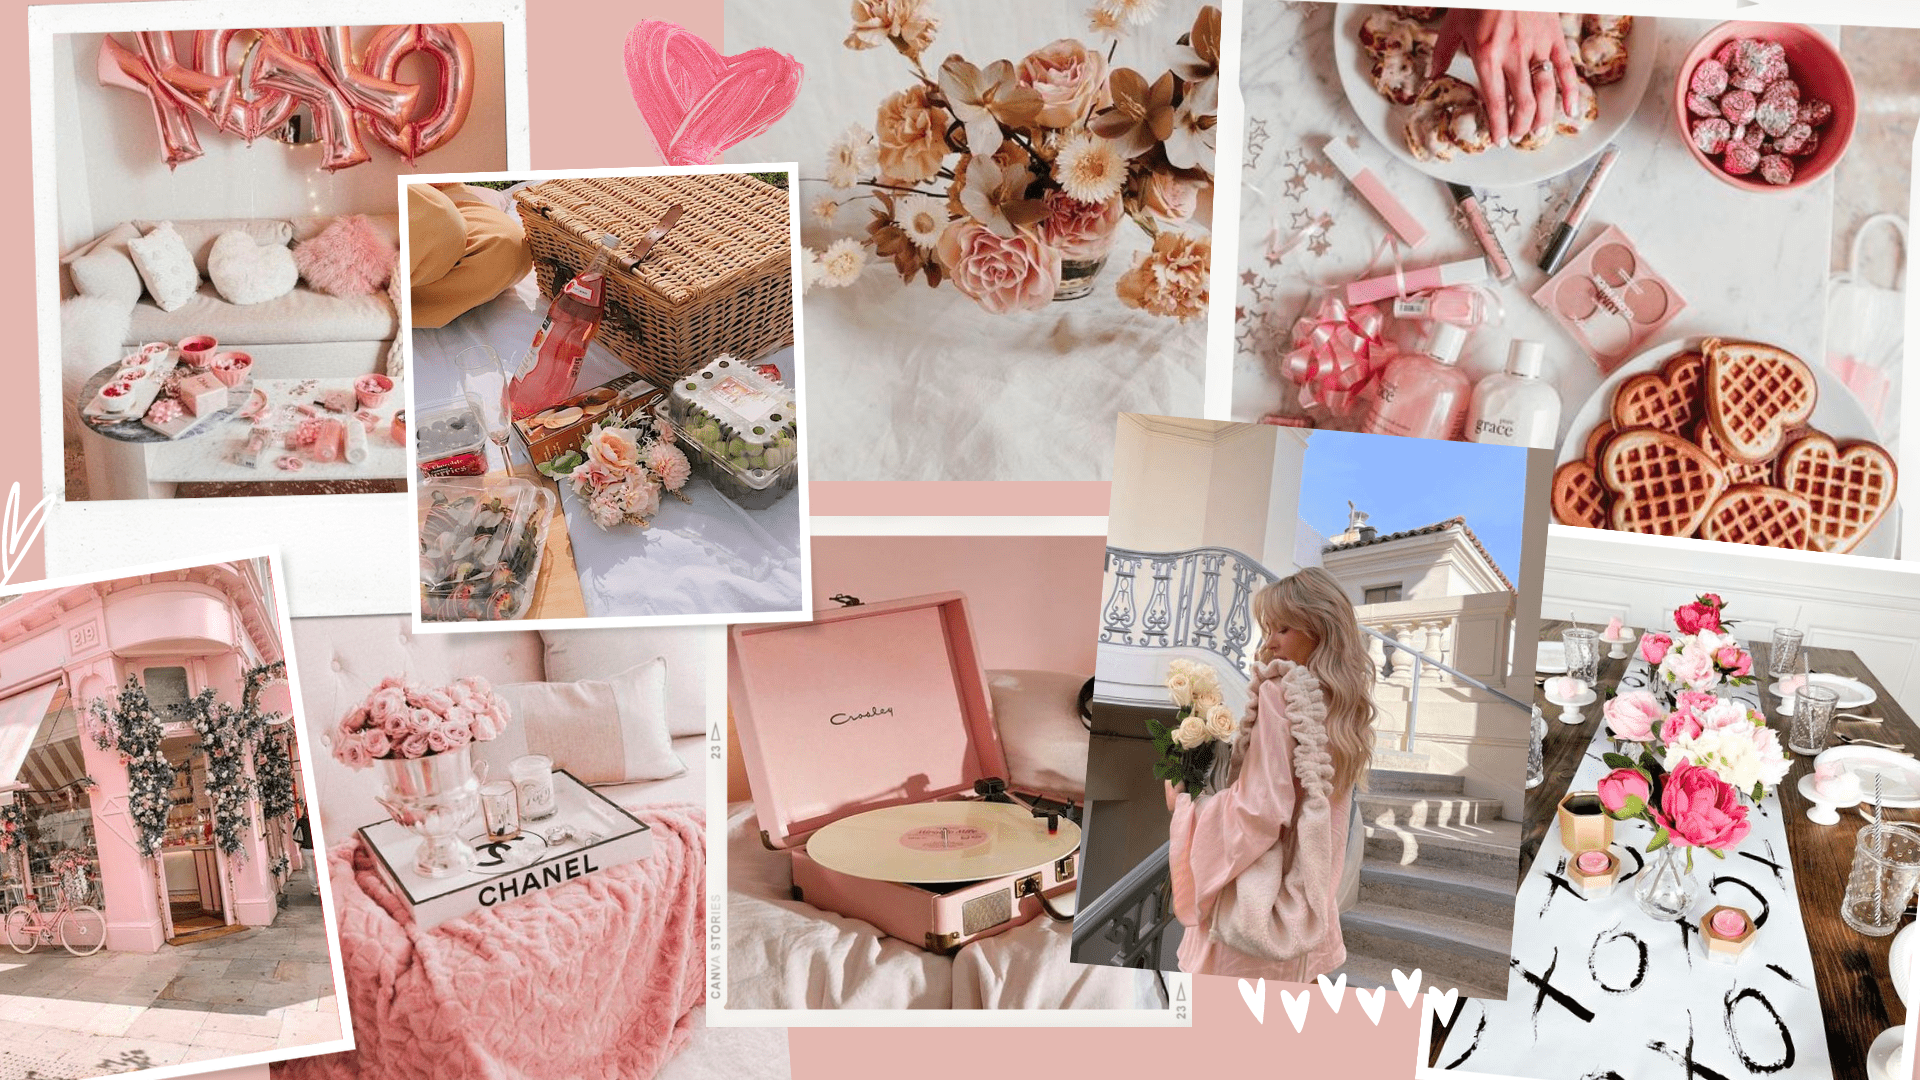 A collage of pictures with pink and white decorations - Chanel, pink collage, February, collage